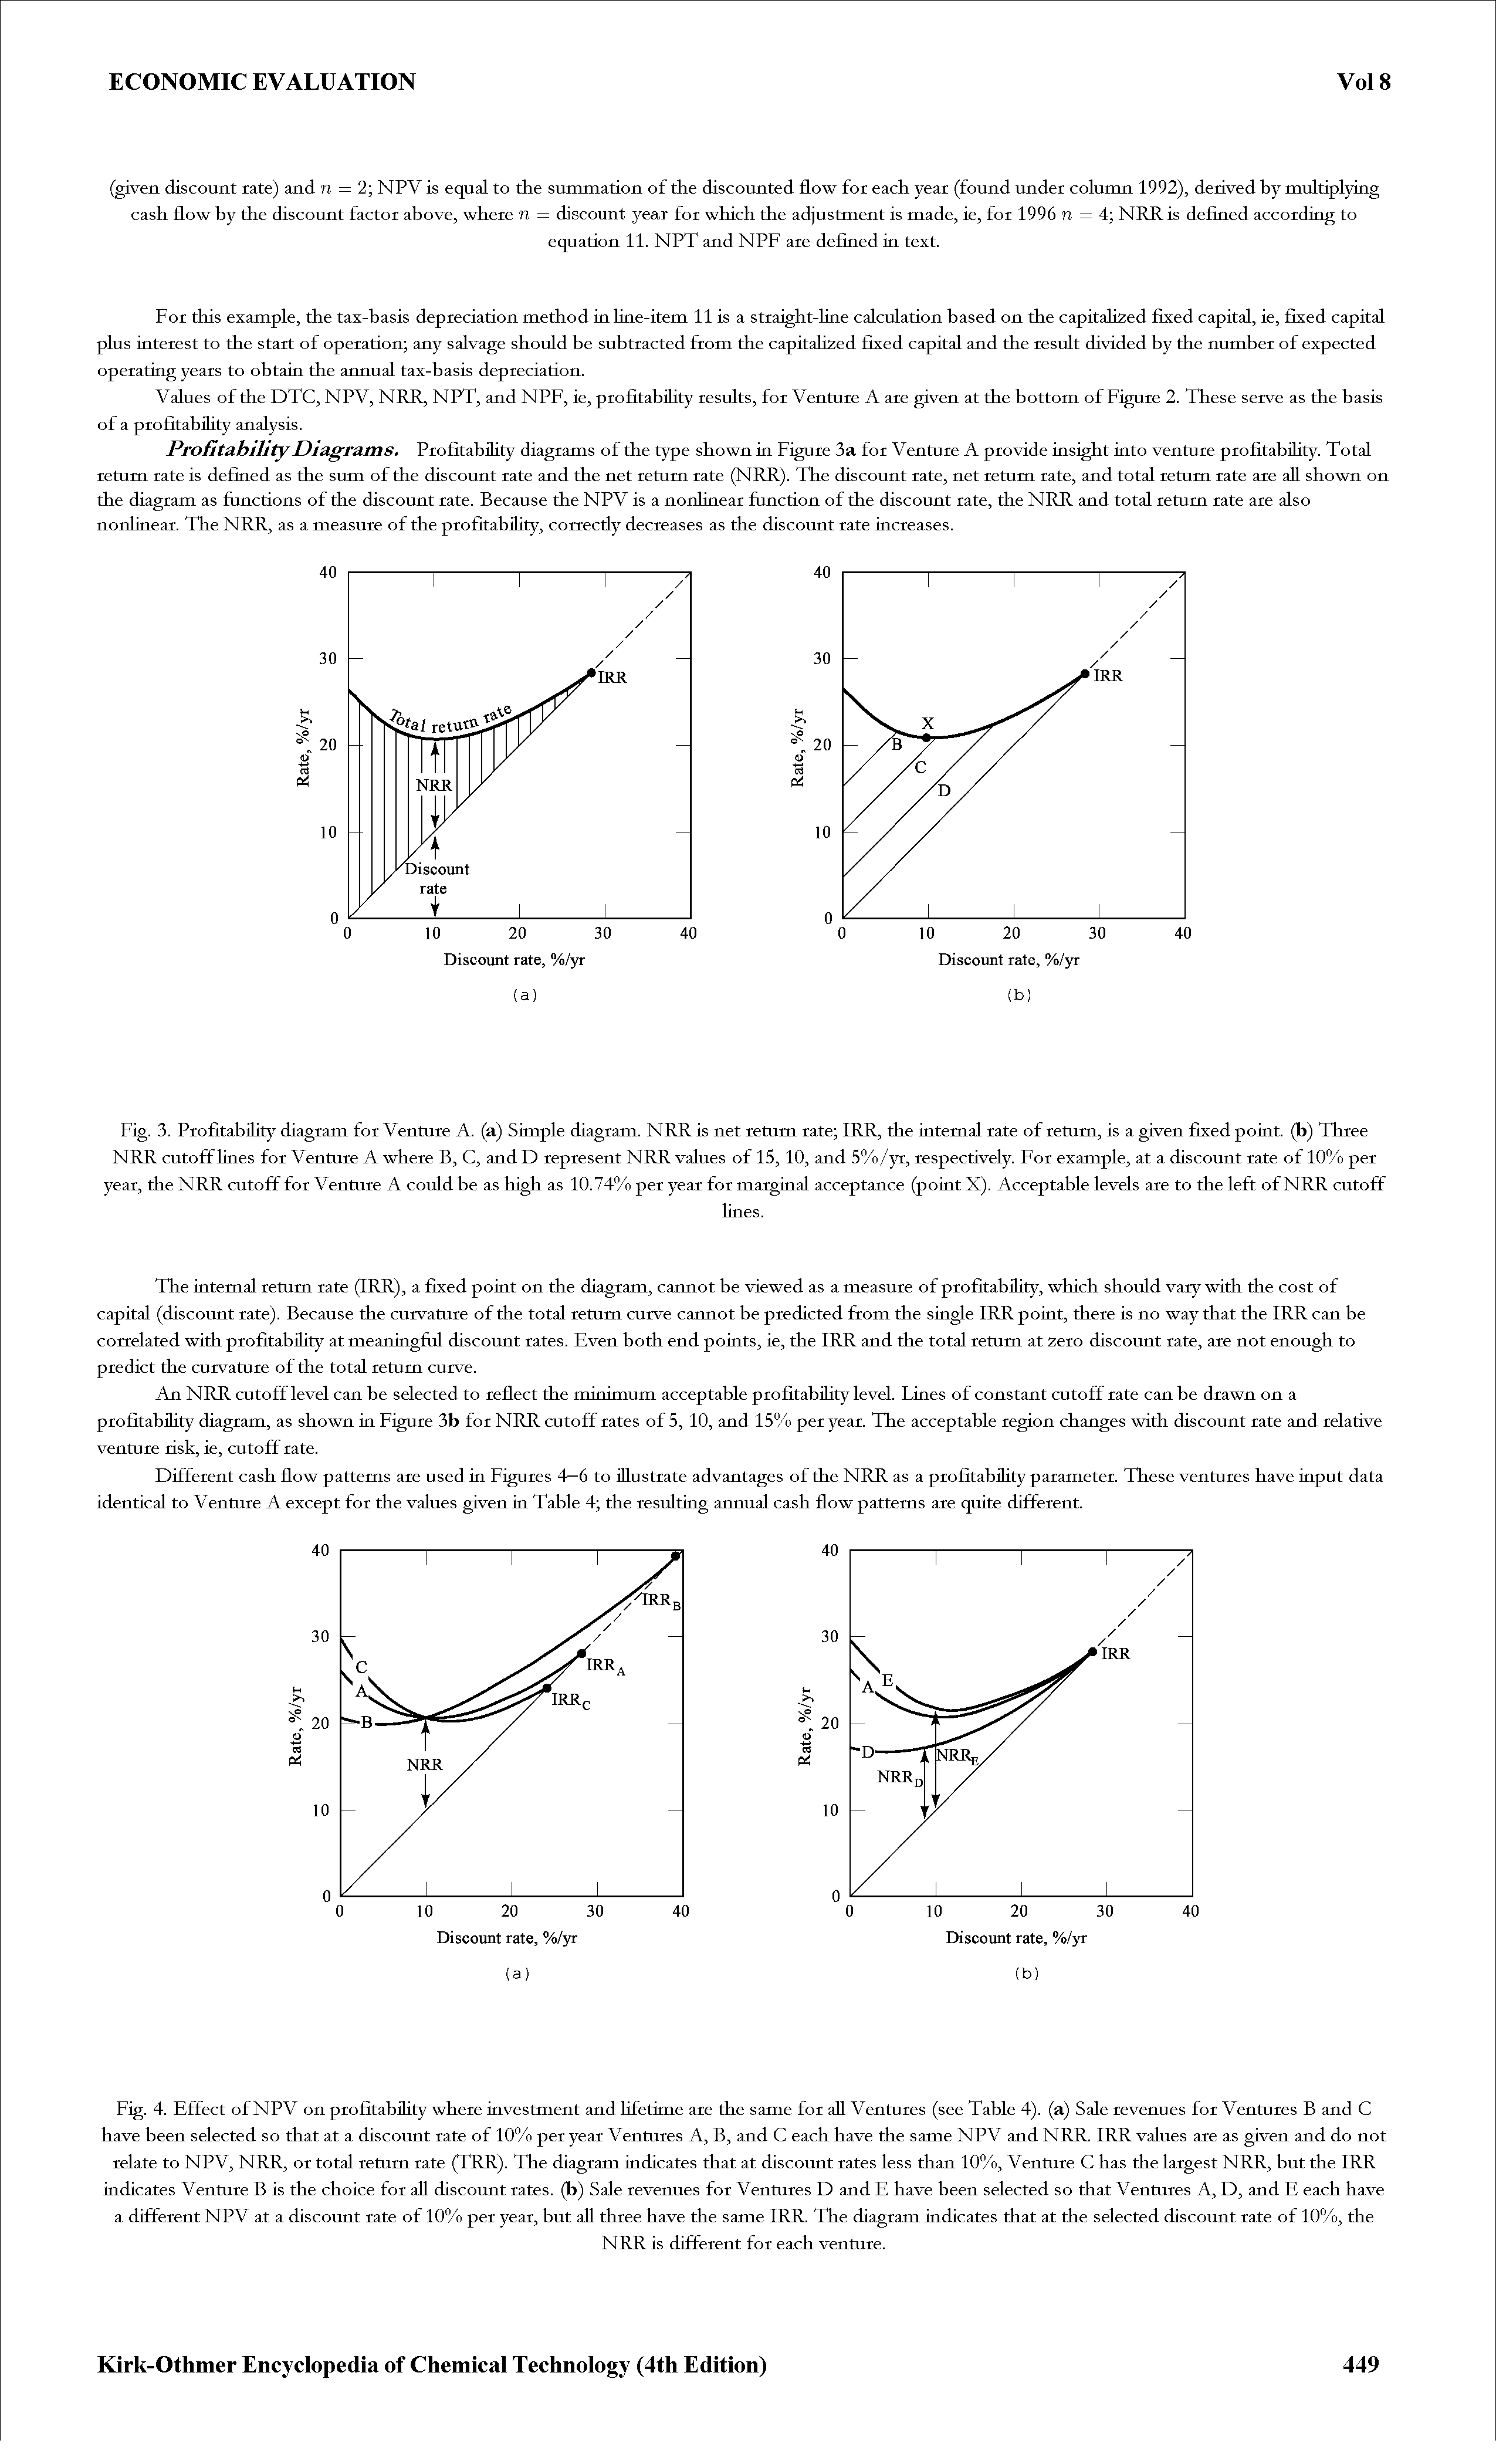 Fig. 3. Profitabihty diagram for Venture A. (a) Simple diagram. NRR is net return rate IRR, the internal rate of return, is a given fixed point, (b) Three NRR cutoff lines for Venture A where B, C, and D represent NRR values of 15, 10, and 5%/yr, respectively. For example, at a discount rate of 10% per year, the NRR cutoff for Venture A could be as high as 10.74% per year for marginal acceptance (point X). Acceptable levels are to the left of NRR cutoff...